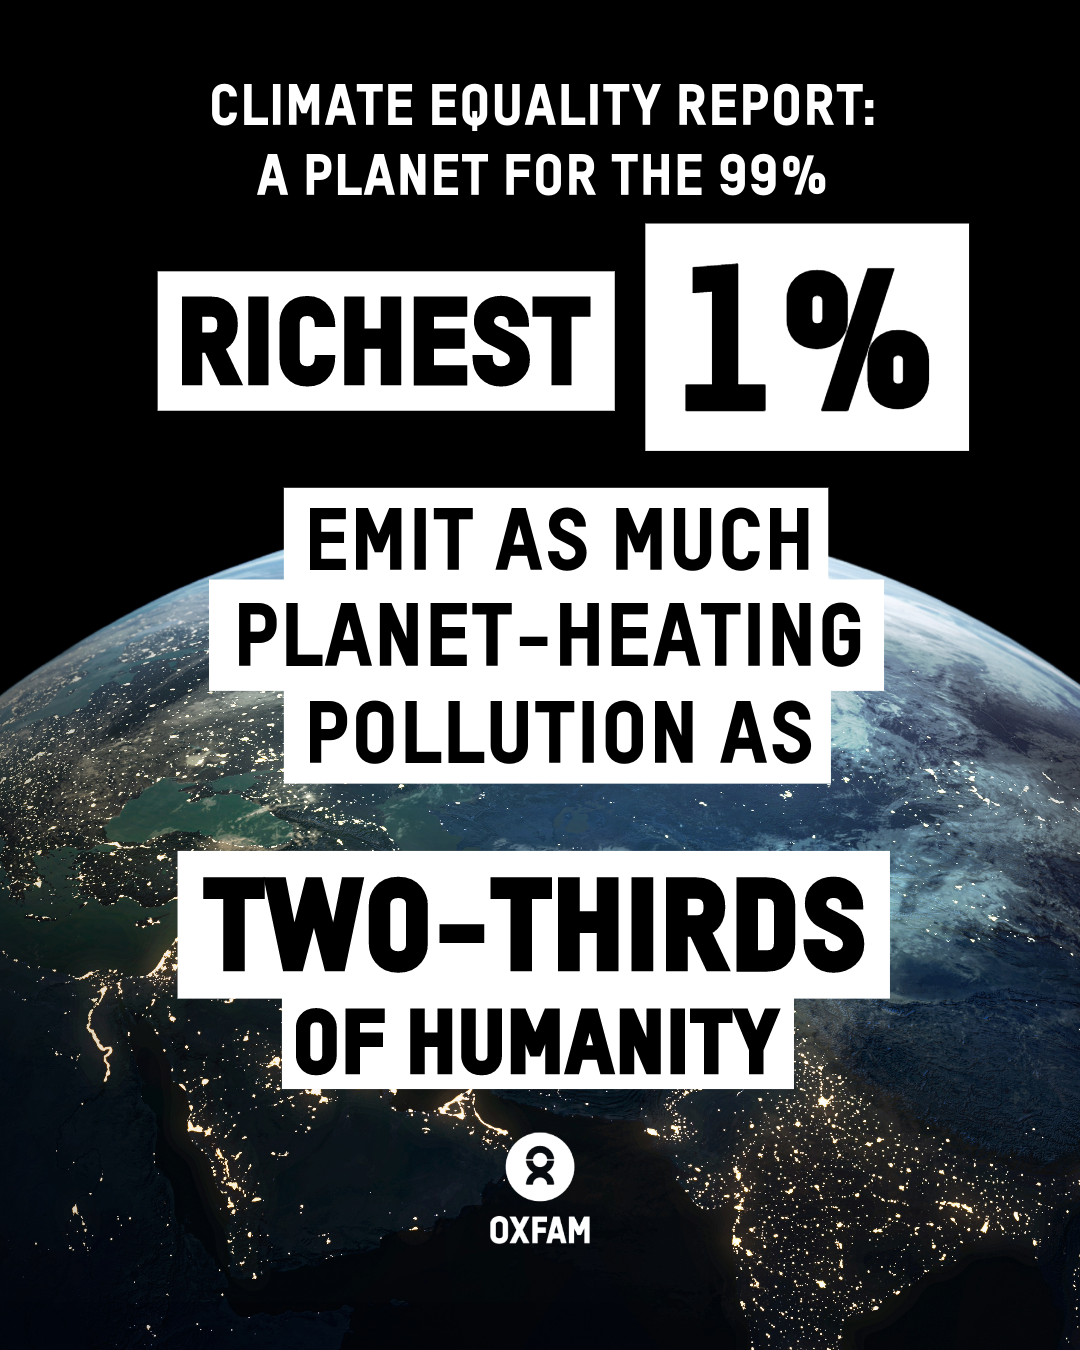 Richest 1% globally emit as much planet-heating pollution as two-thirds of humanity put together